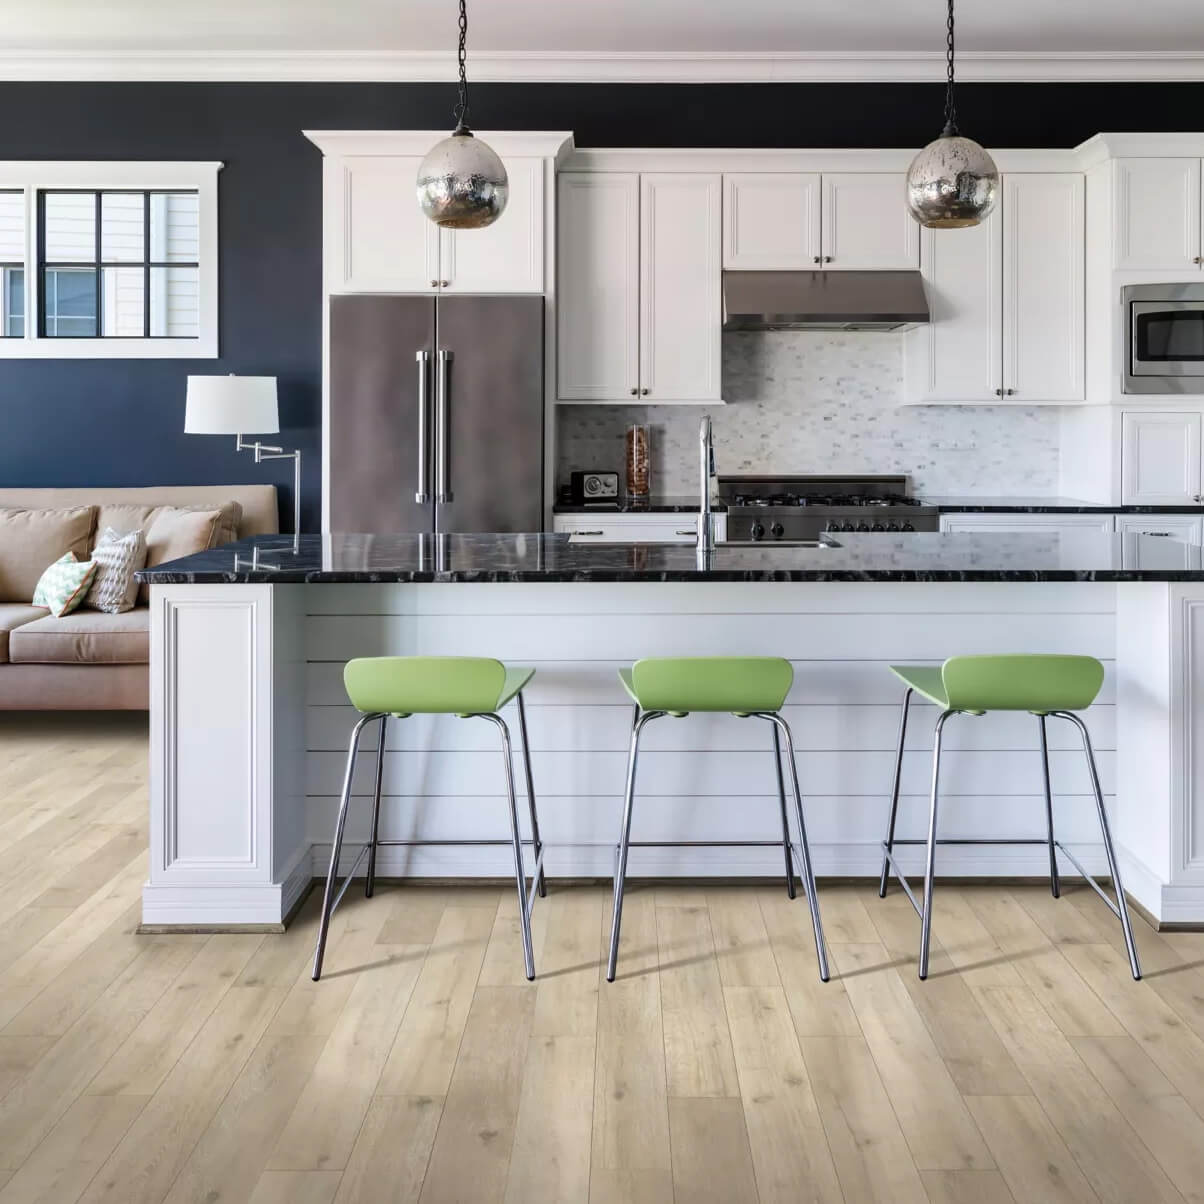 Cabinets | River City Flooring